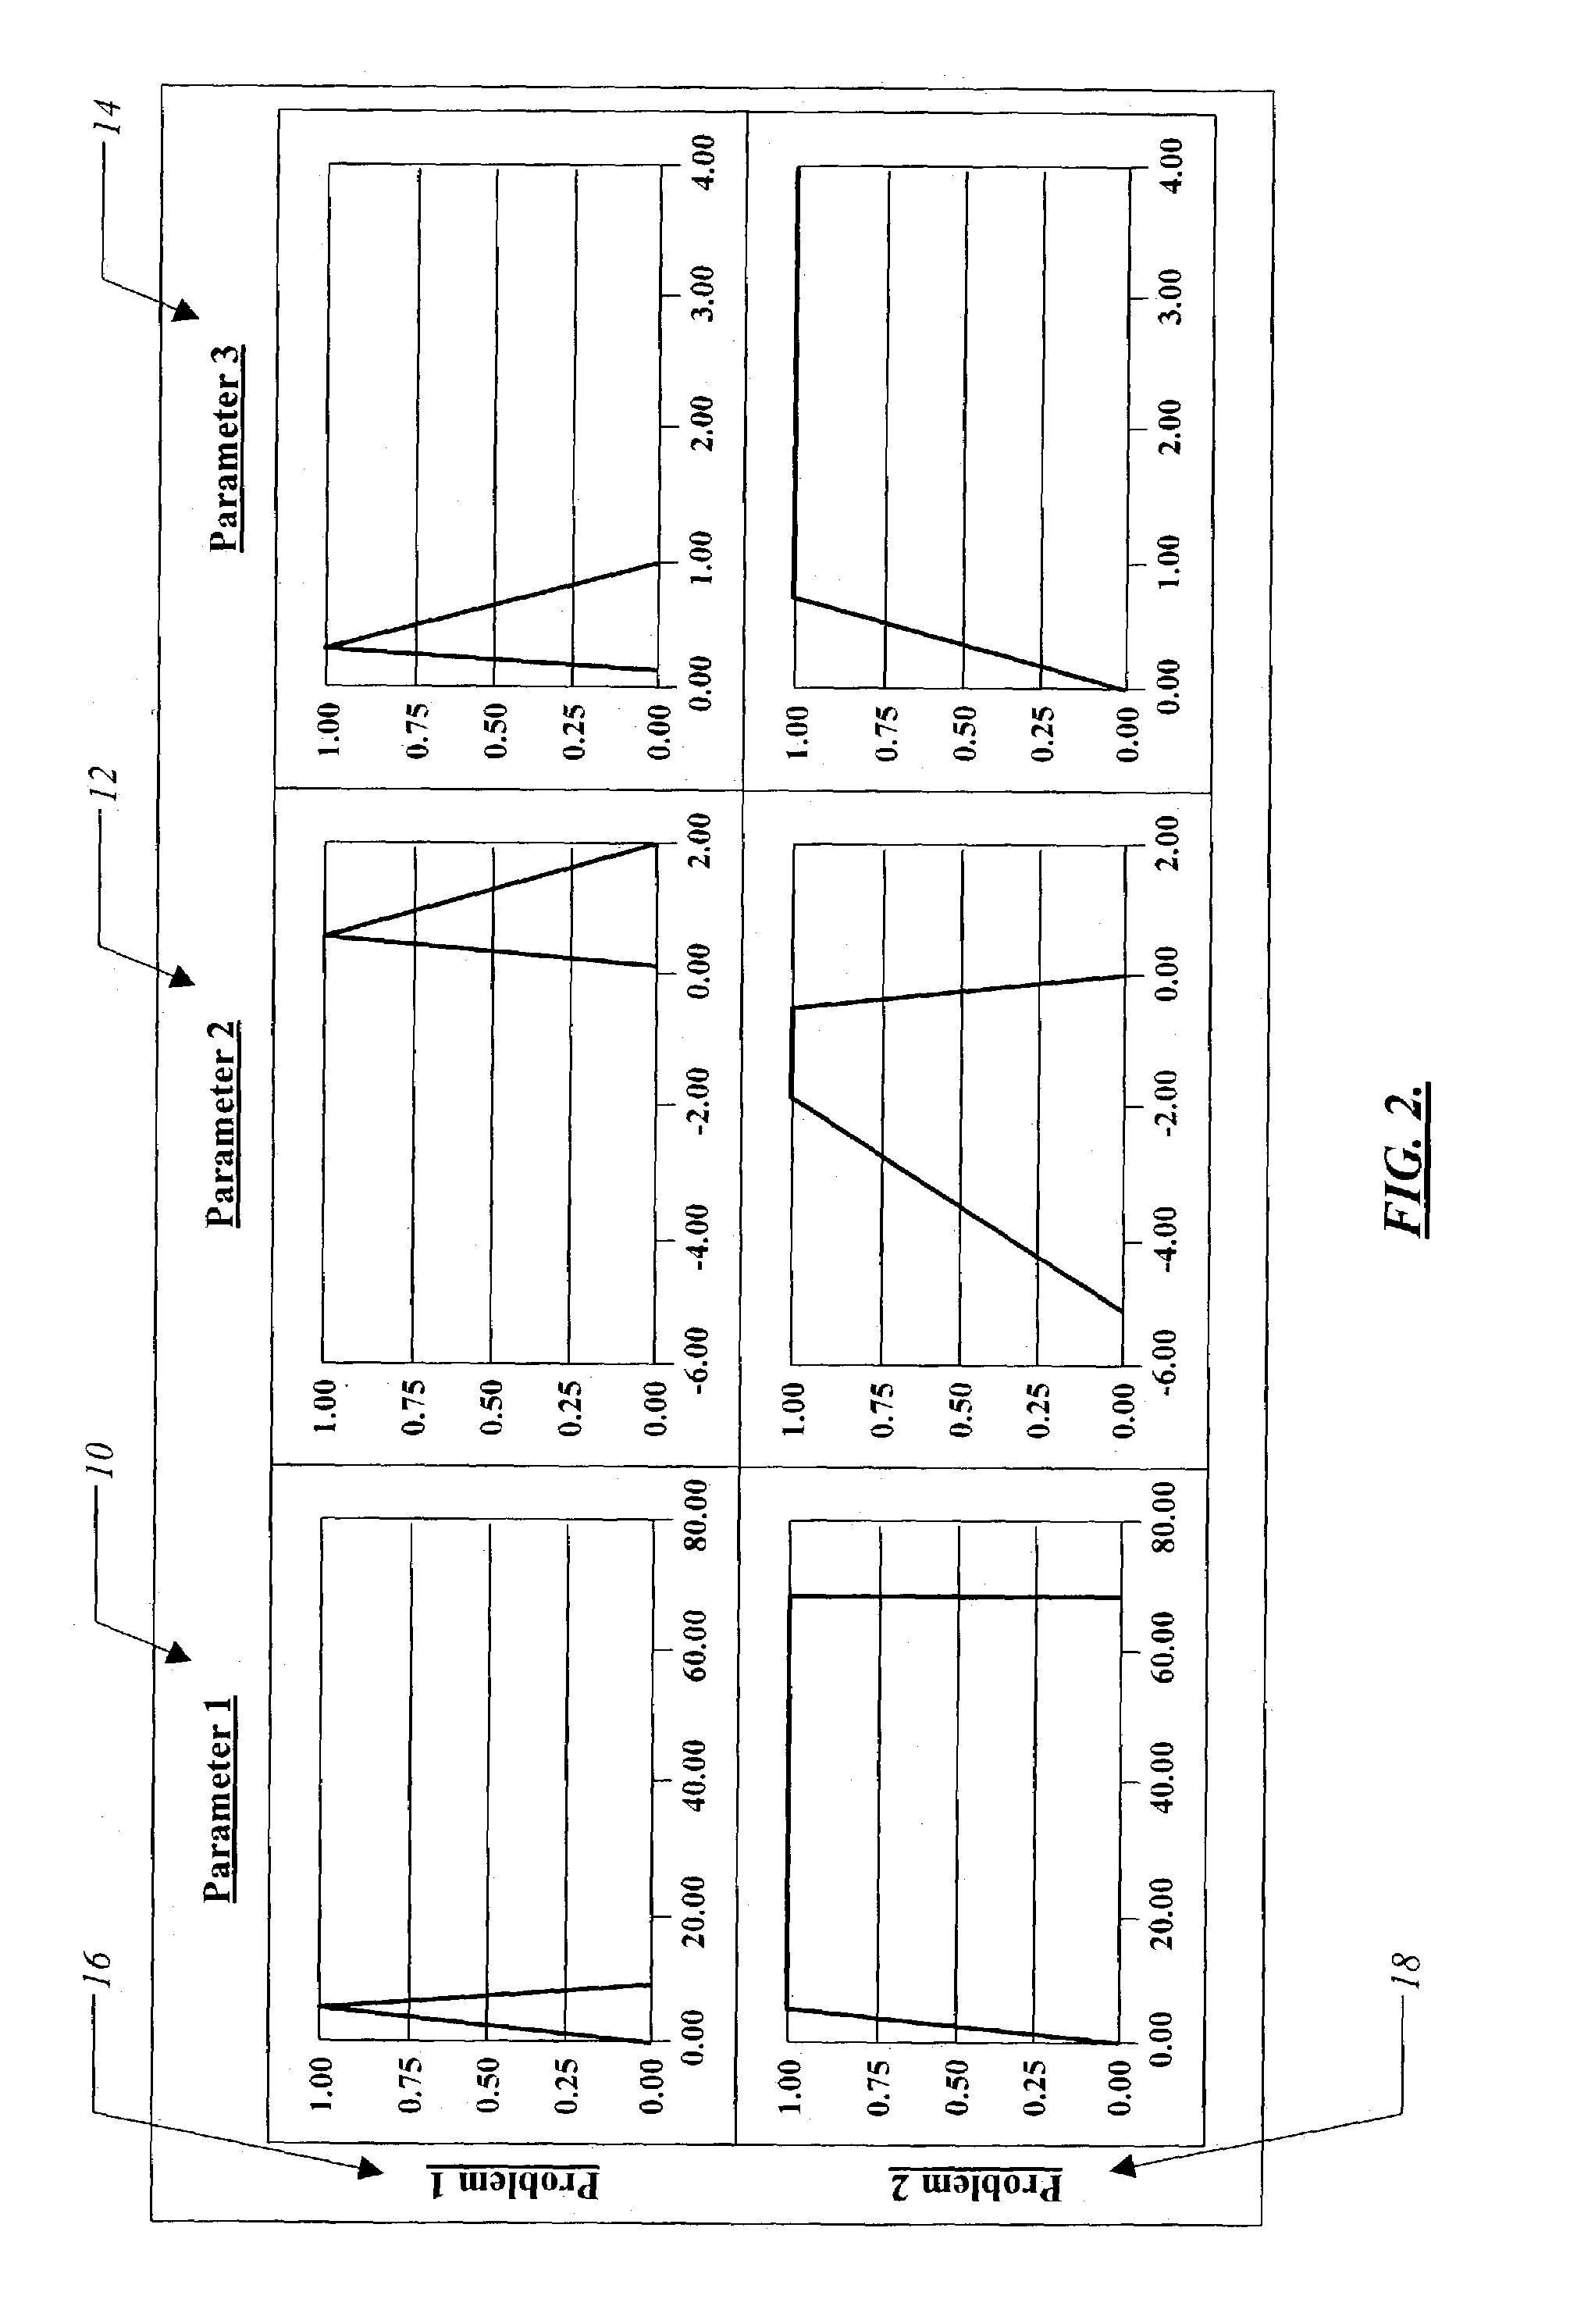 Systems and methods for diagnosing the cause of trend shifts in performance data